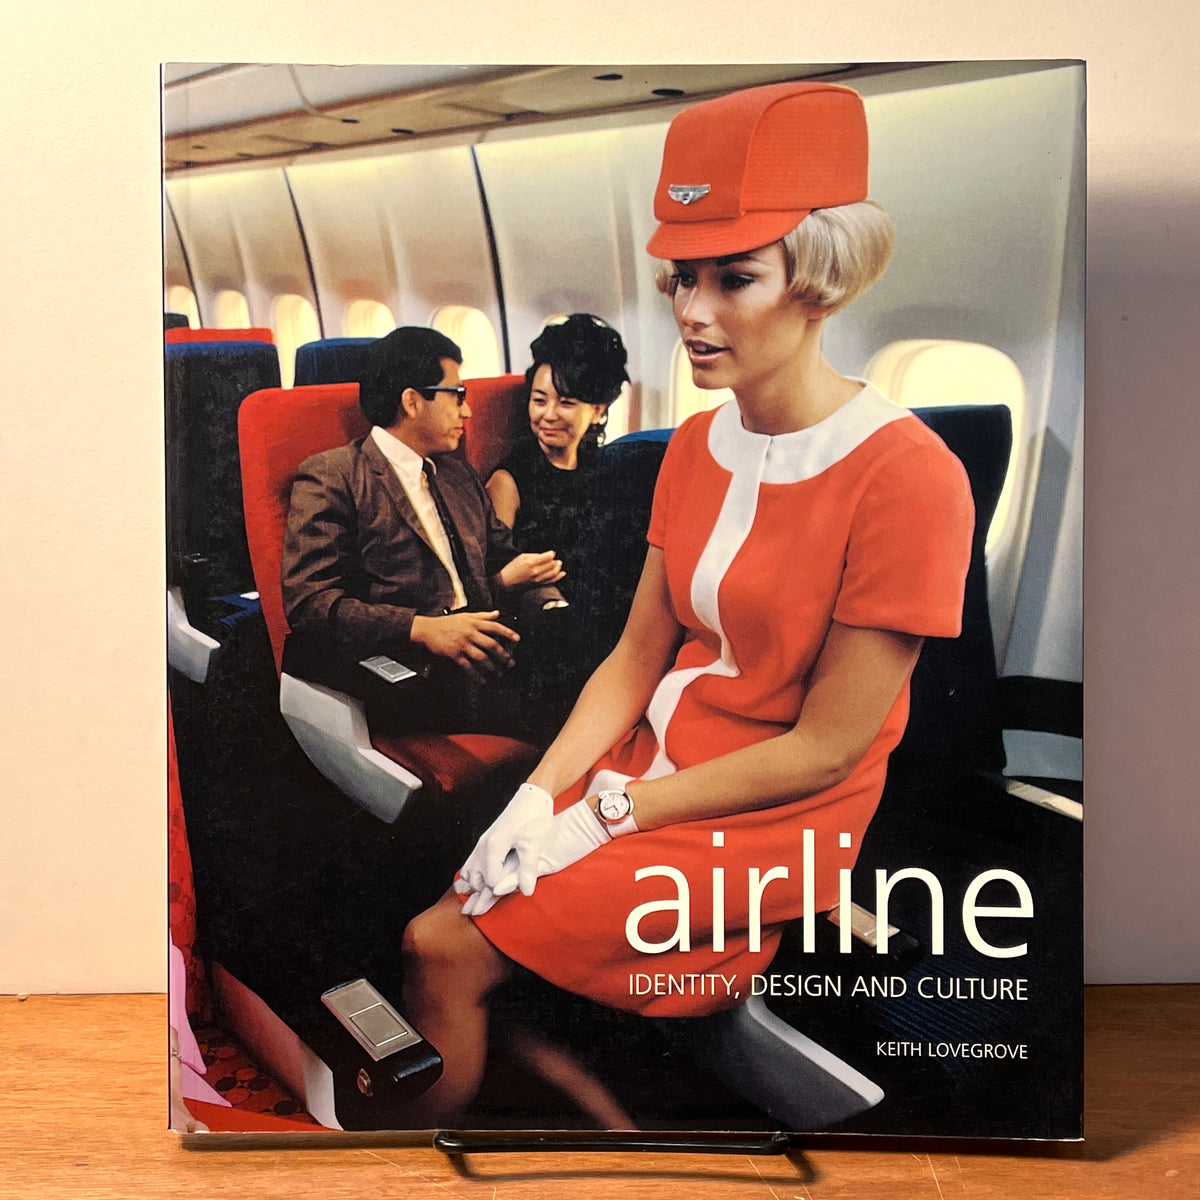 Keith Lovegrove, Airline: Identity, Design and Culture, 2000, SC, Very Good